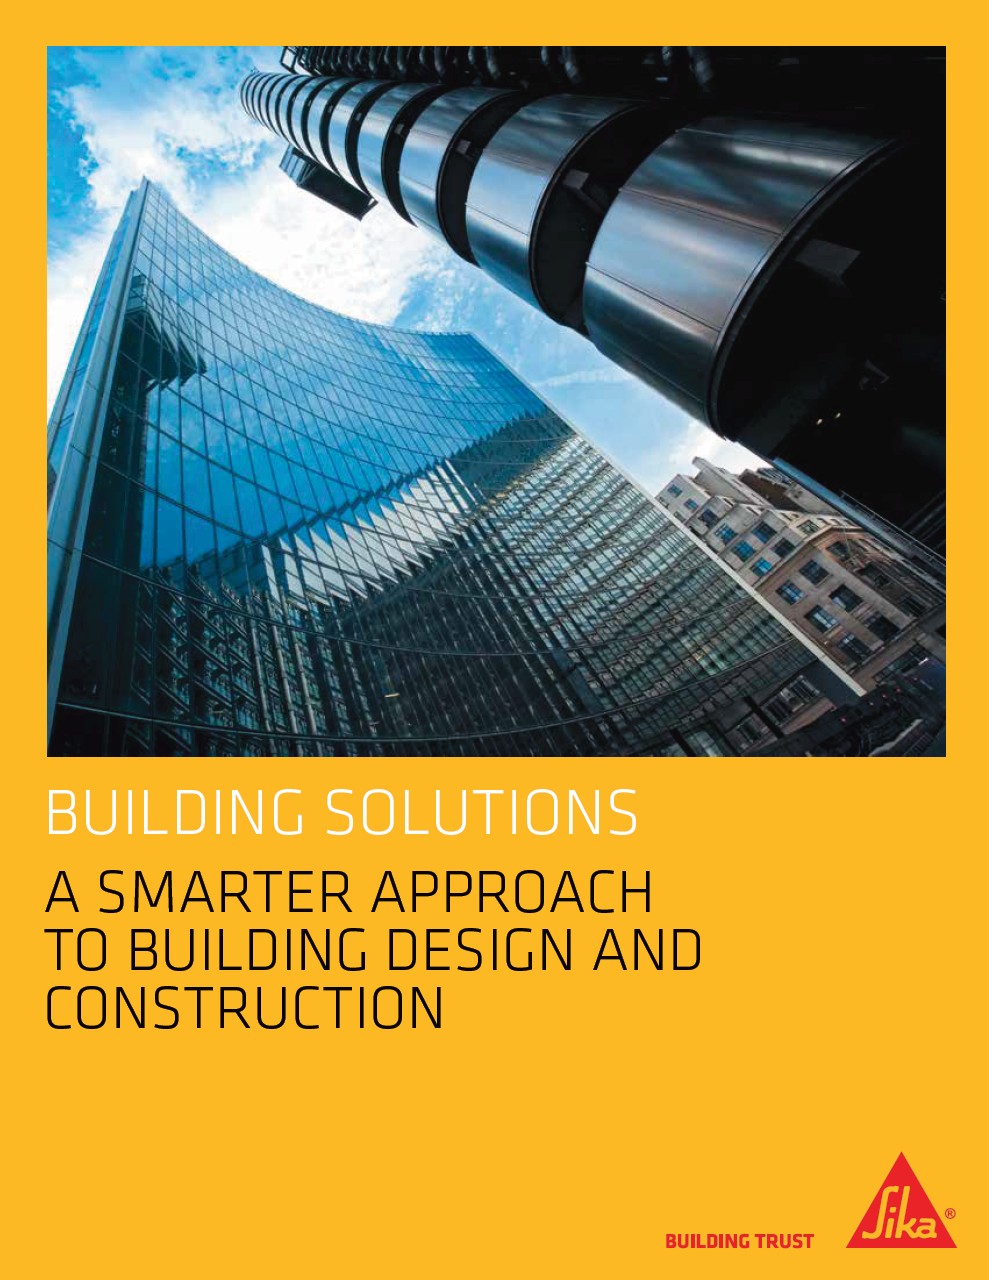 Download our Building Solutions Brochure!